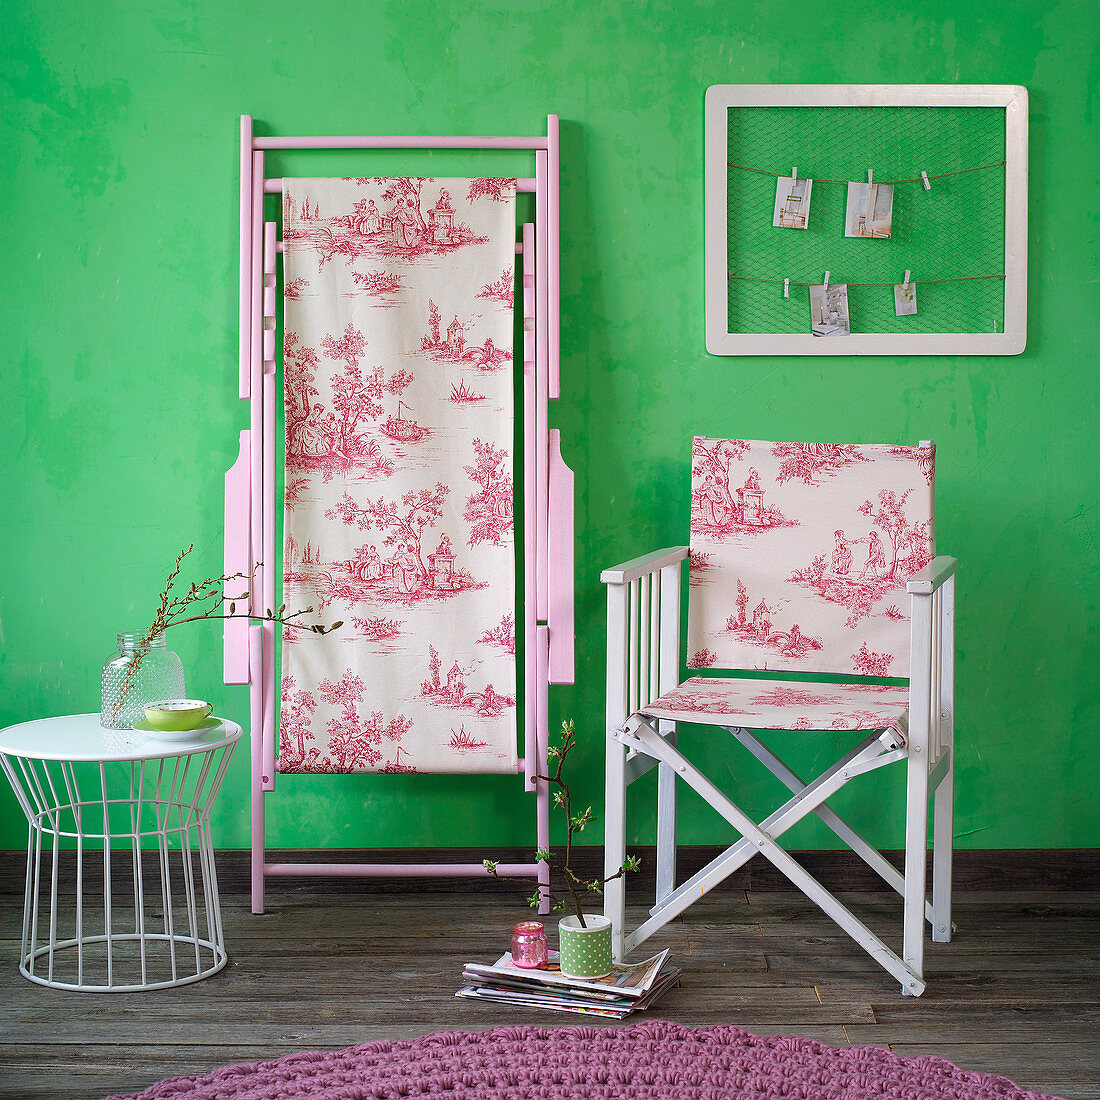 Folding chair with toile-de-jouy fabric seat and back in front of green wall